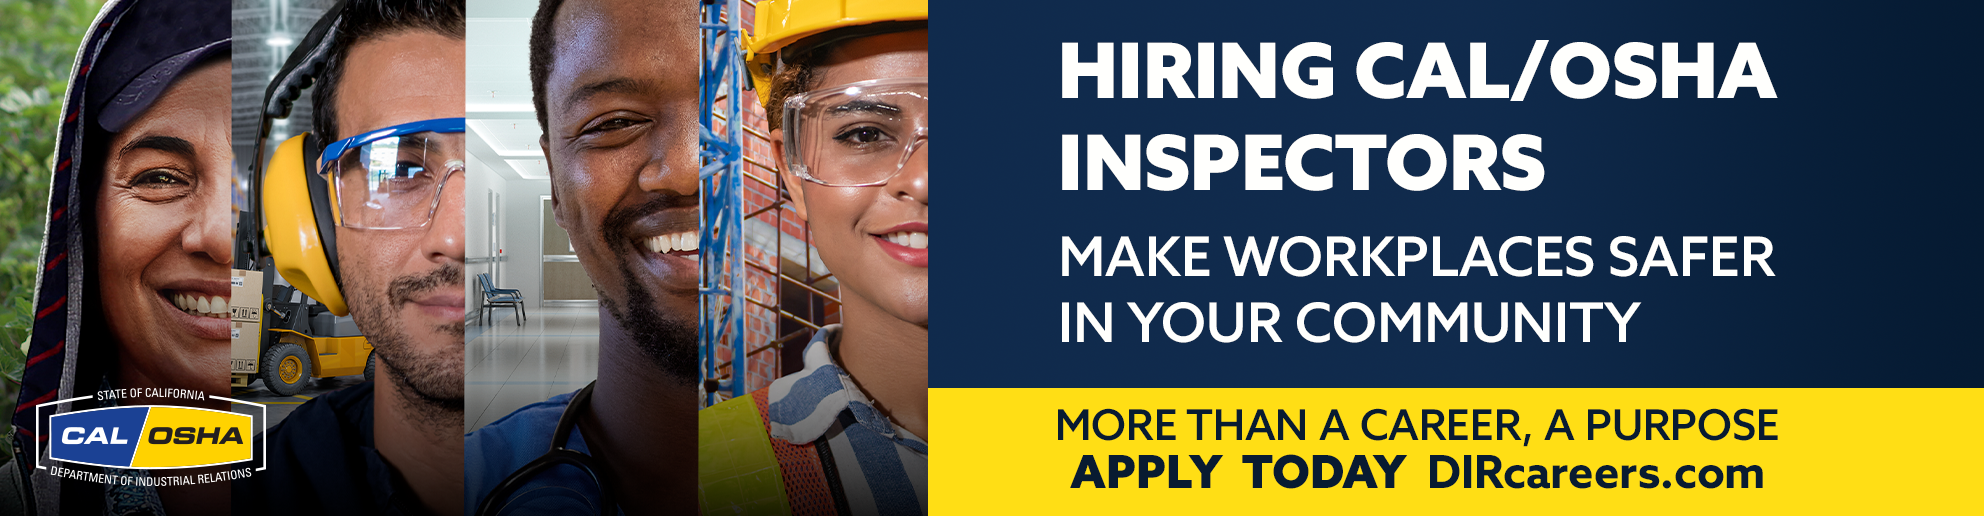 Hiring Cal/OSHA Inspectors. Make workplaces safer in your community. More than a career, a purpose. Apply today at DIRcareers.com 